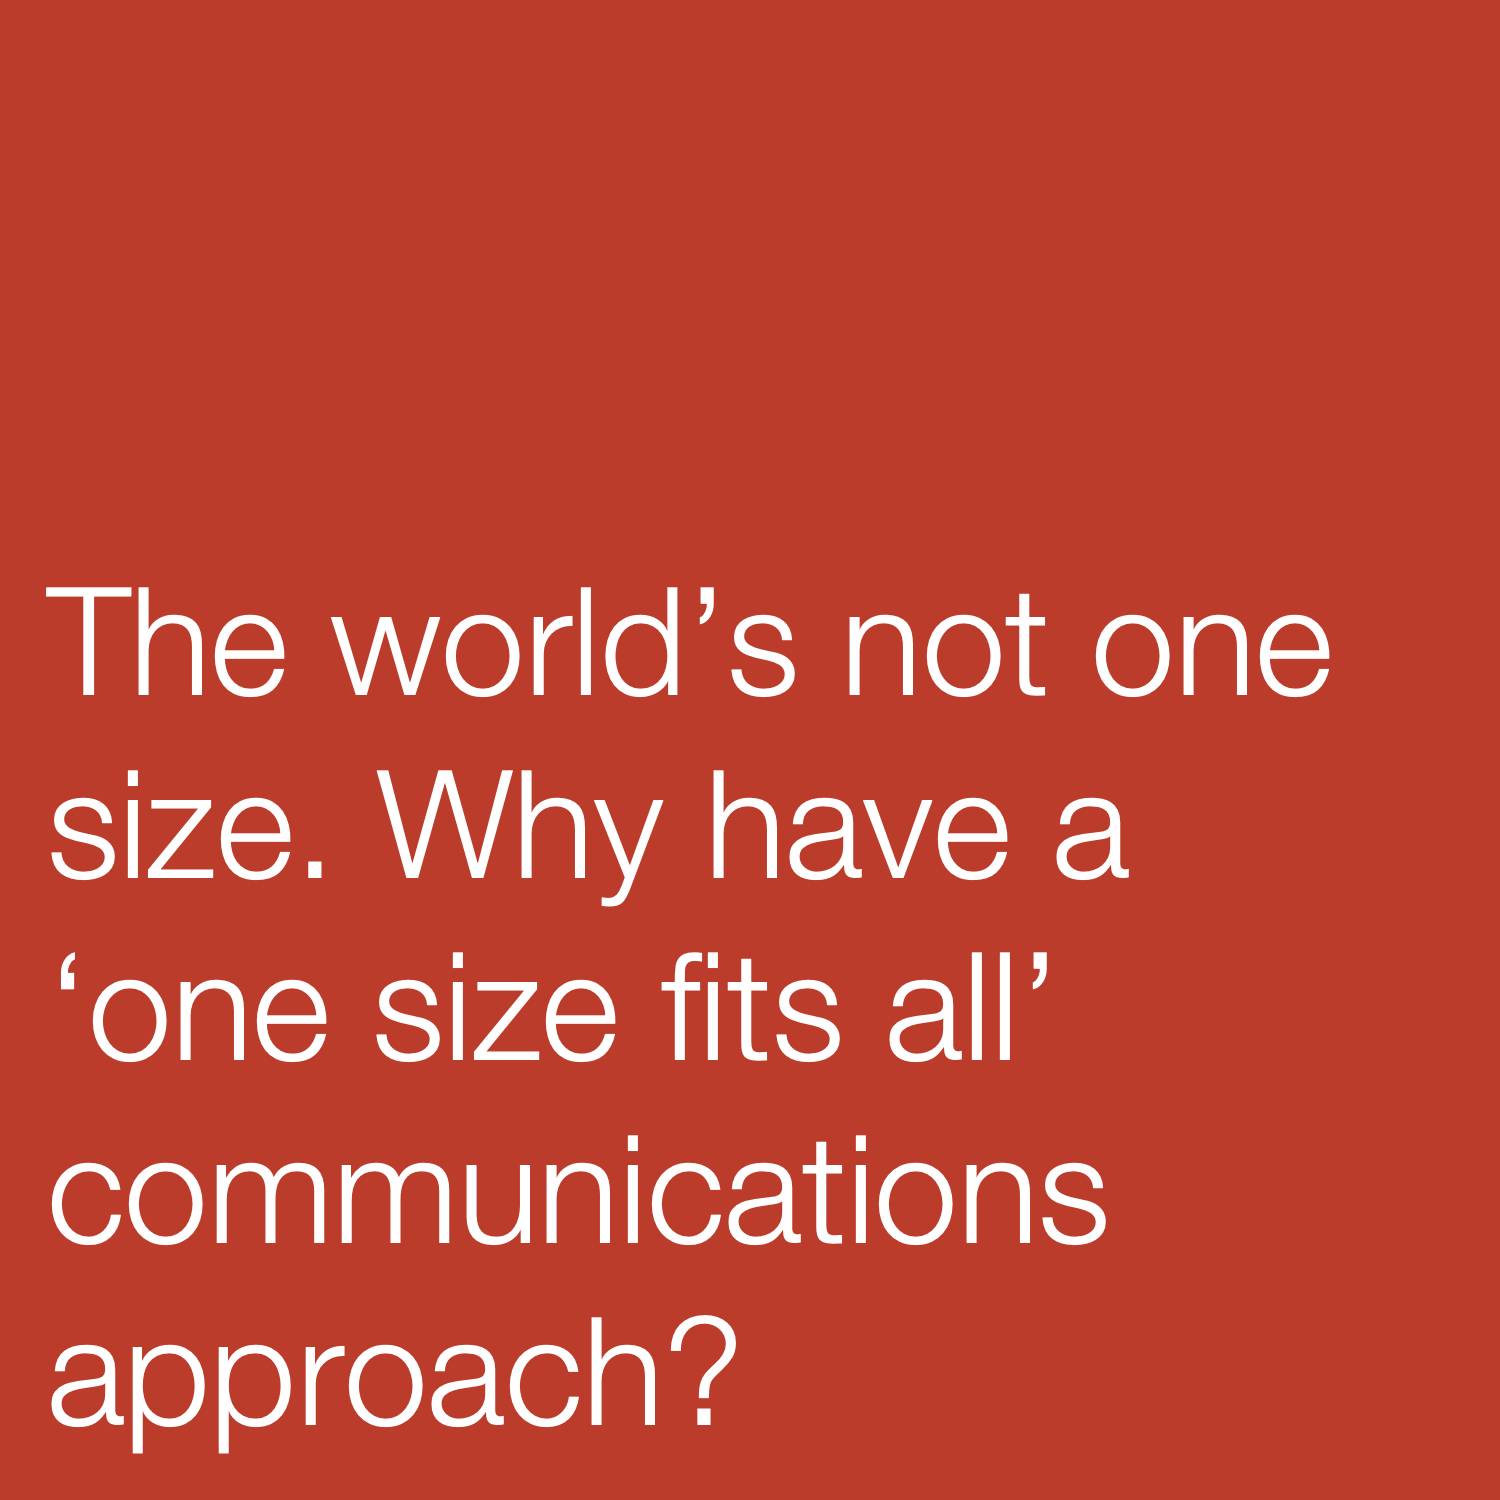 The world's not one size. Why have a 'one size fits all